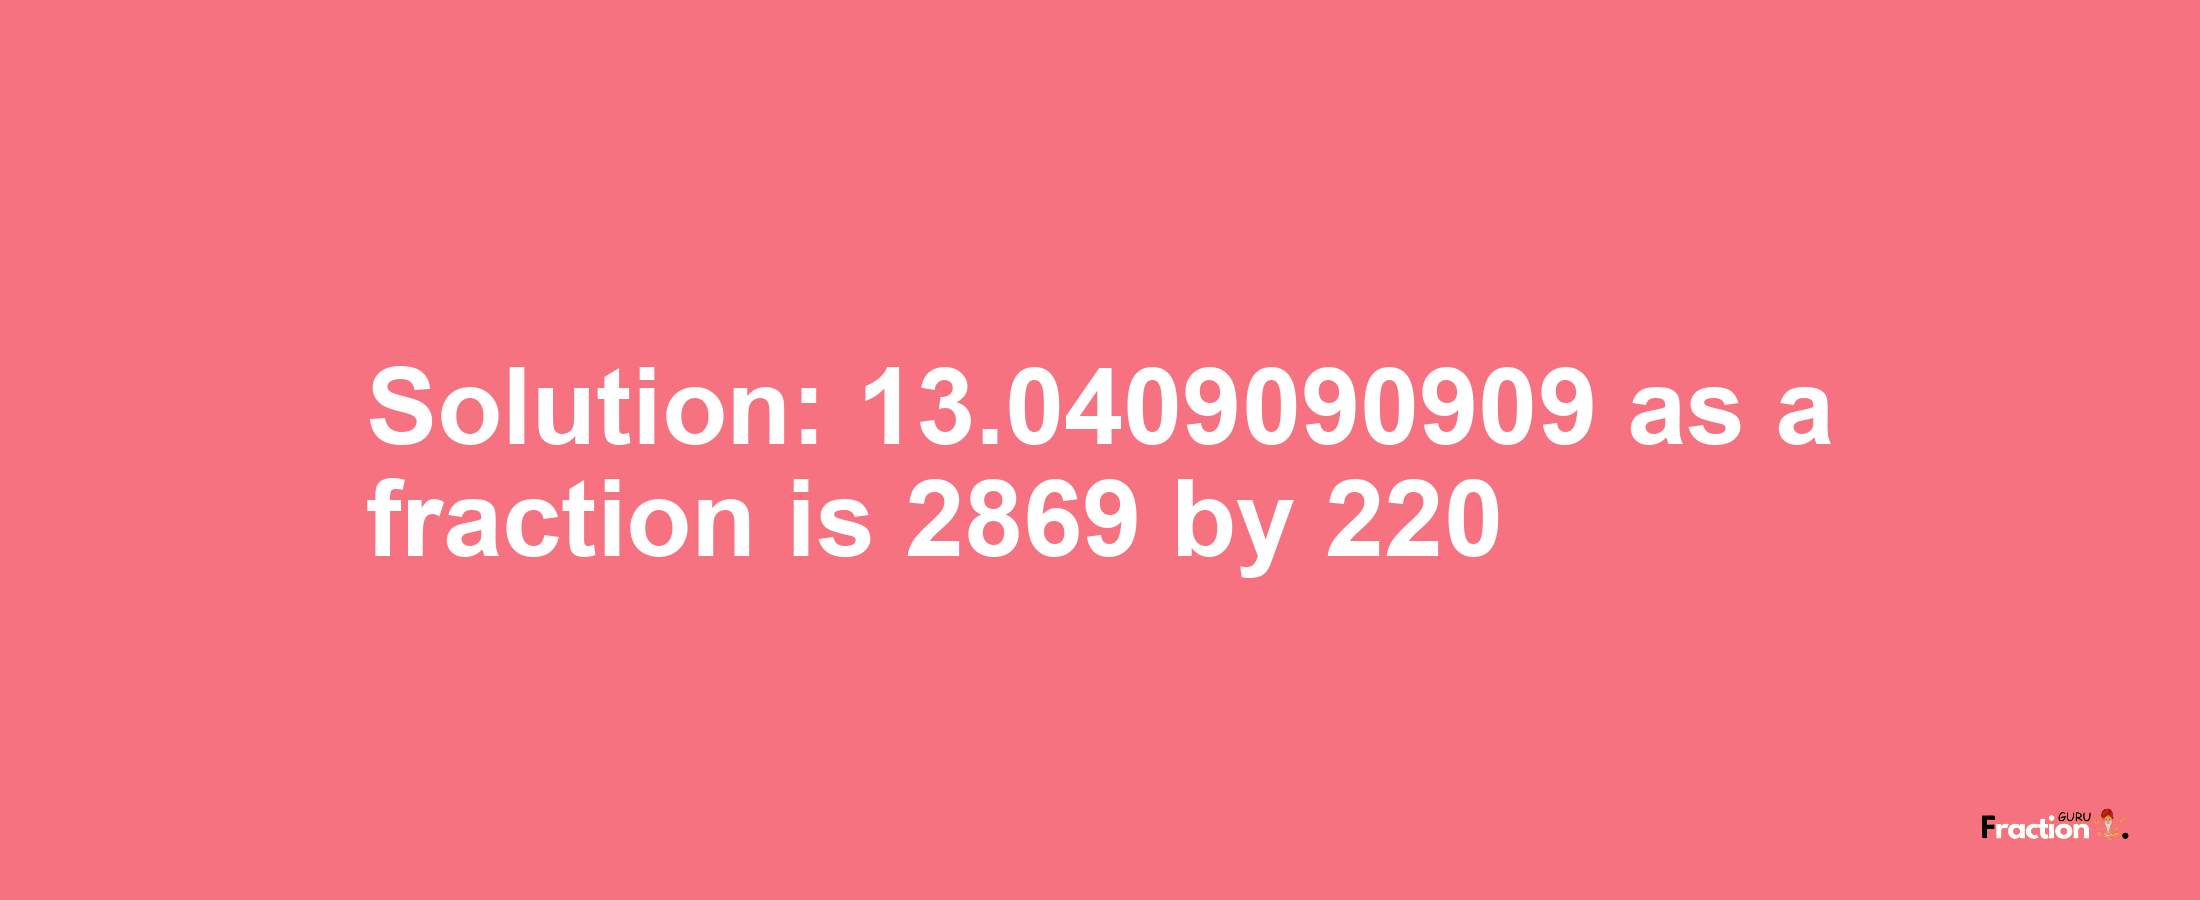 Solution:13.0409090909 as a fraction is 2869/220